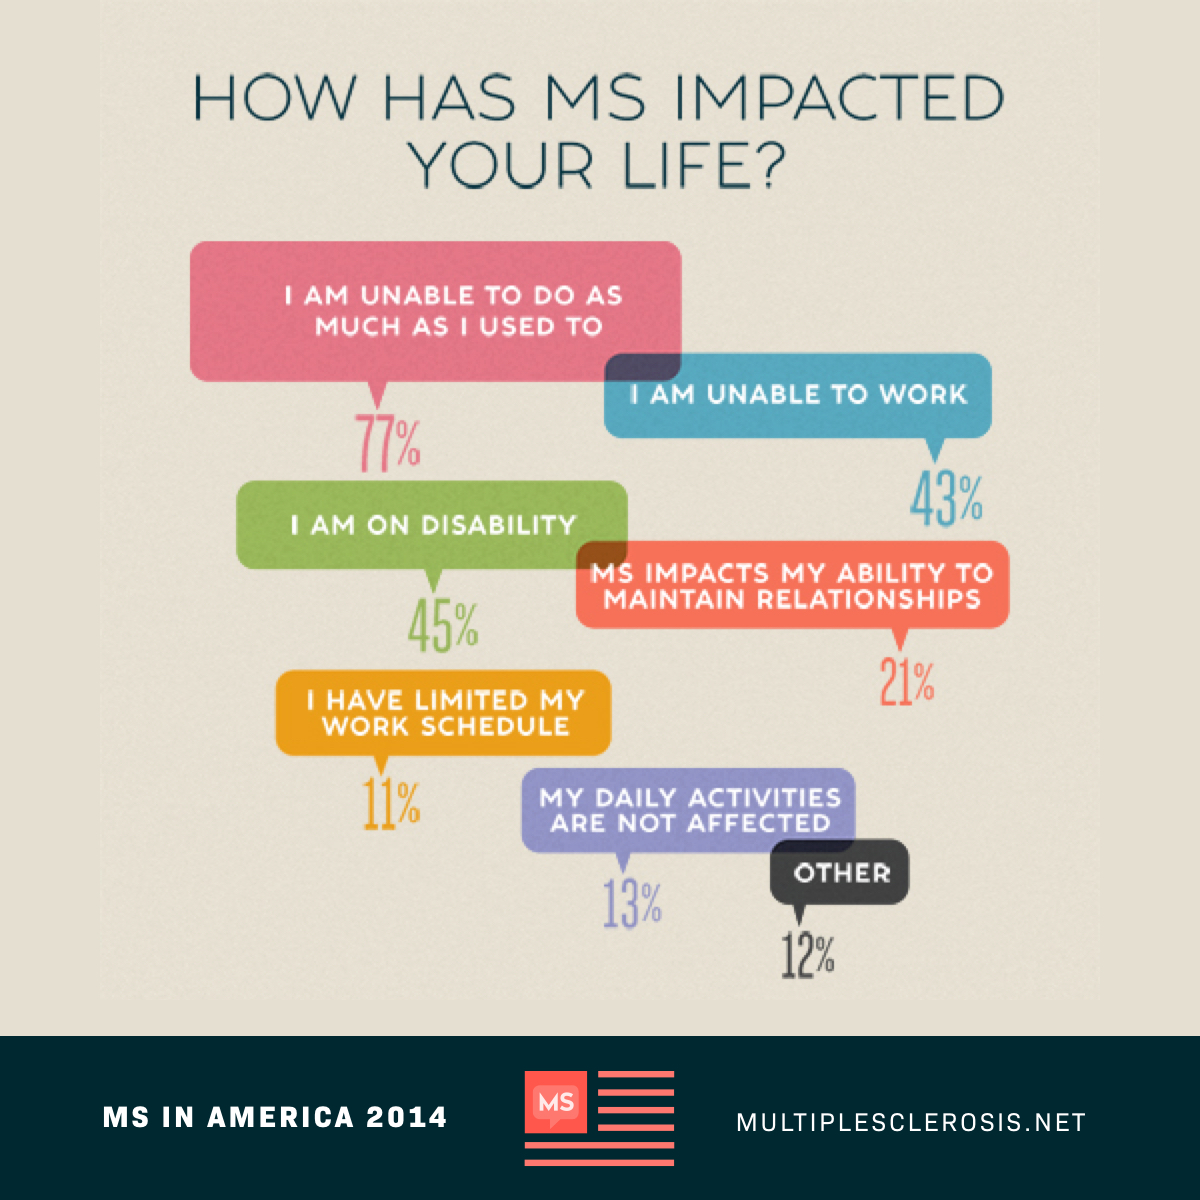 How MS has impacted the lives of participants